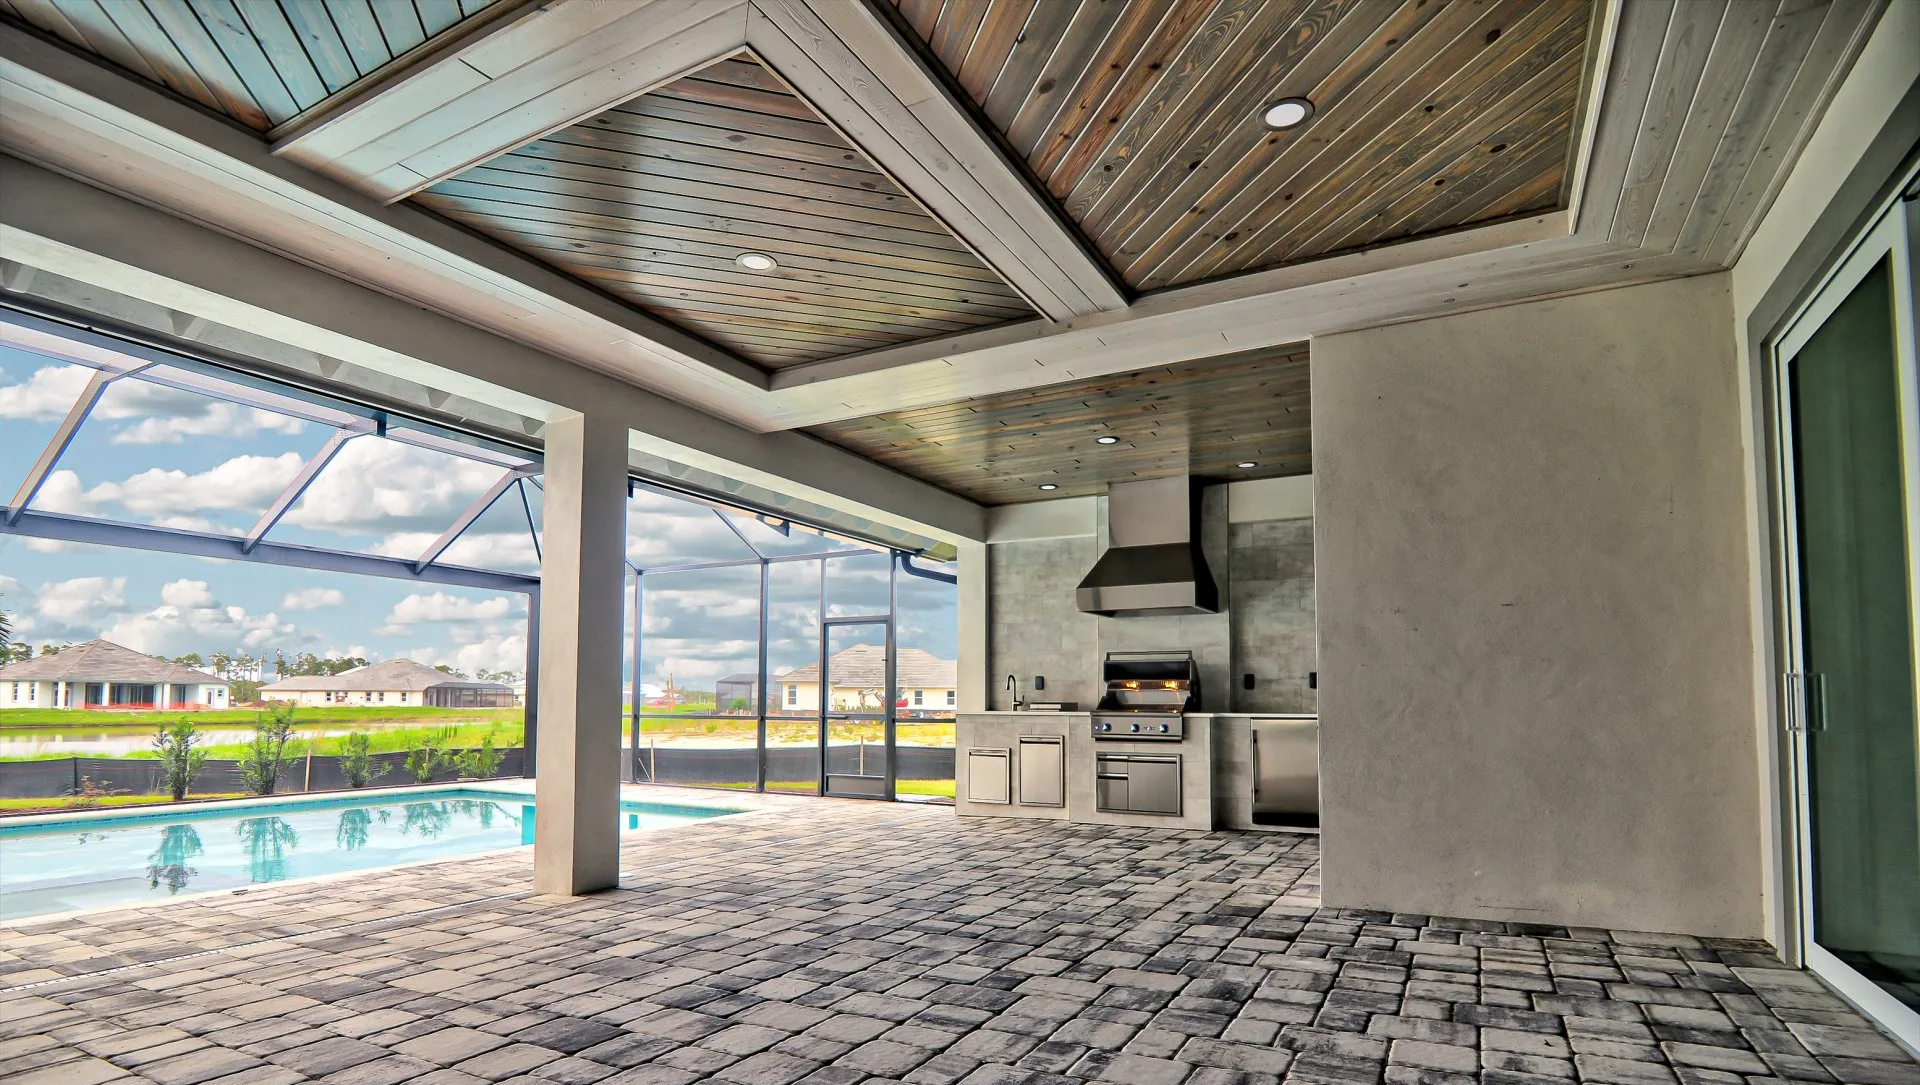 Custom wood ceiling and outdoor kitchen